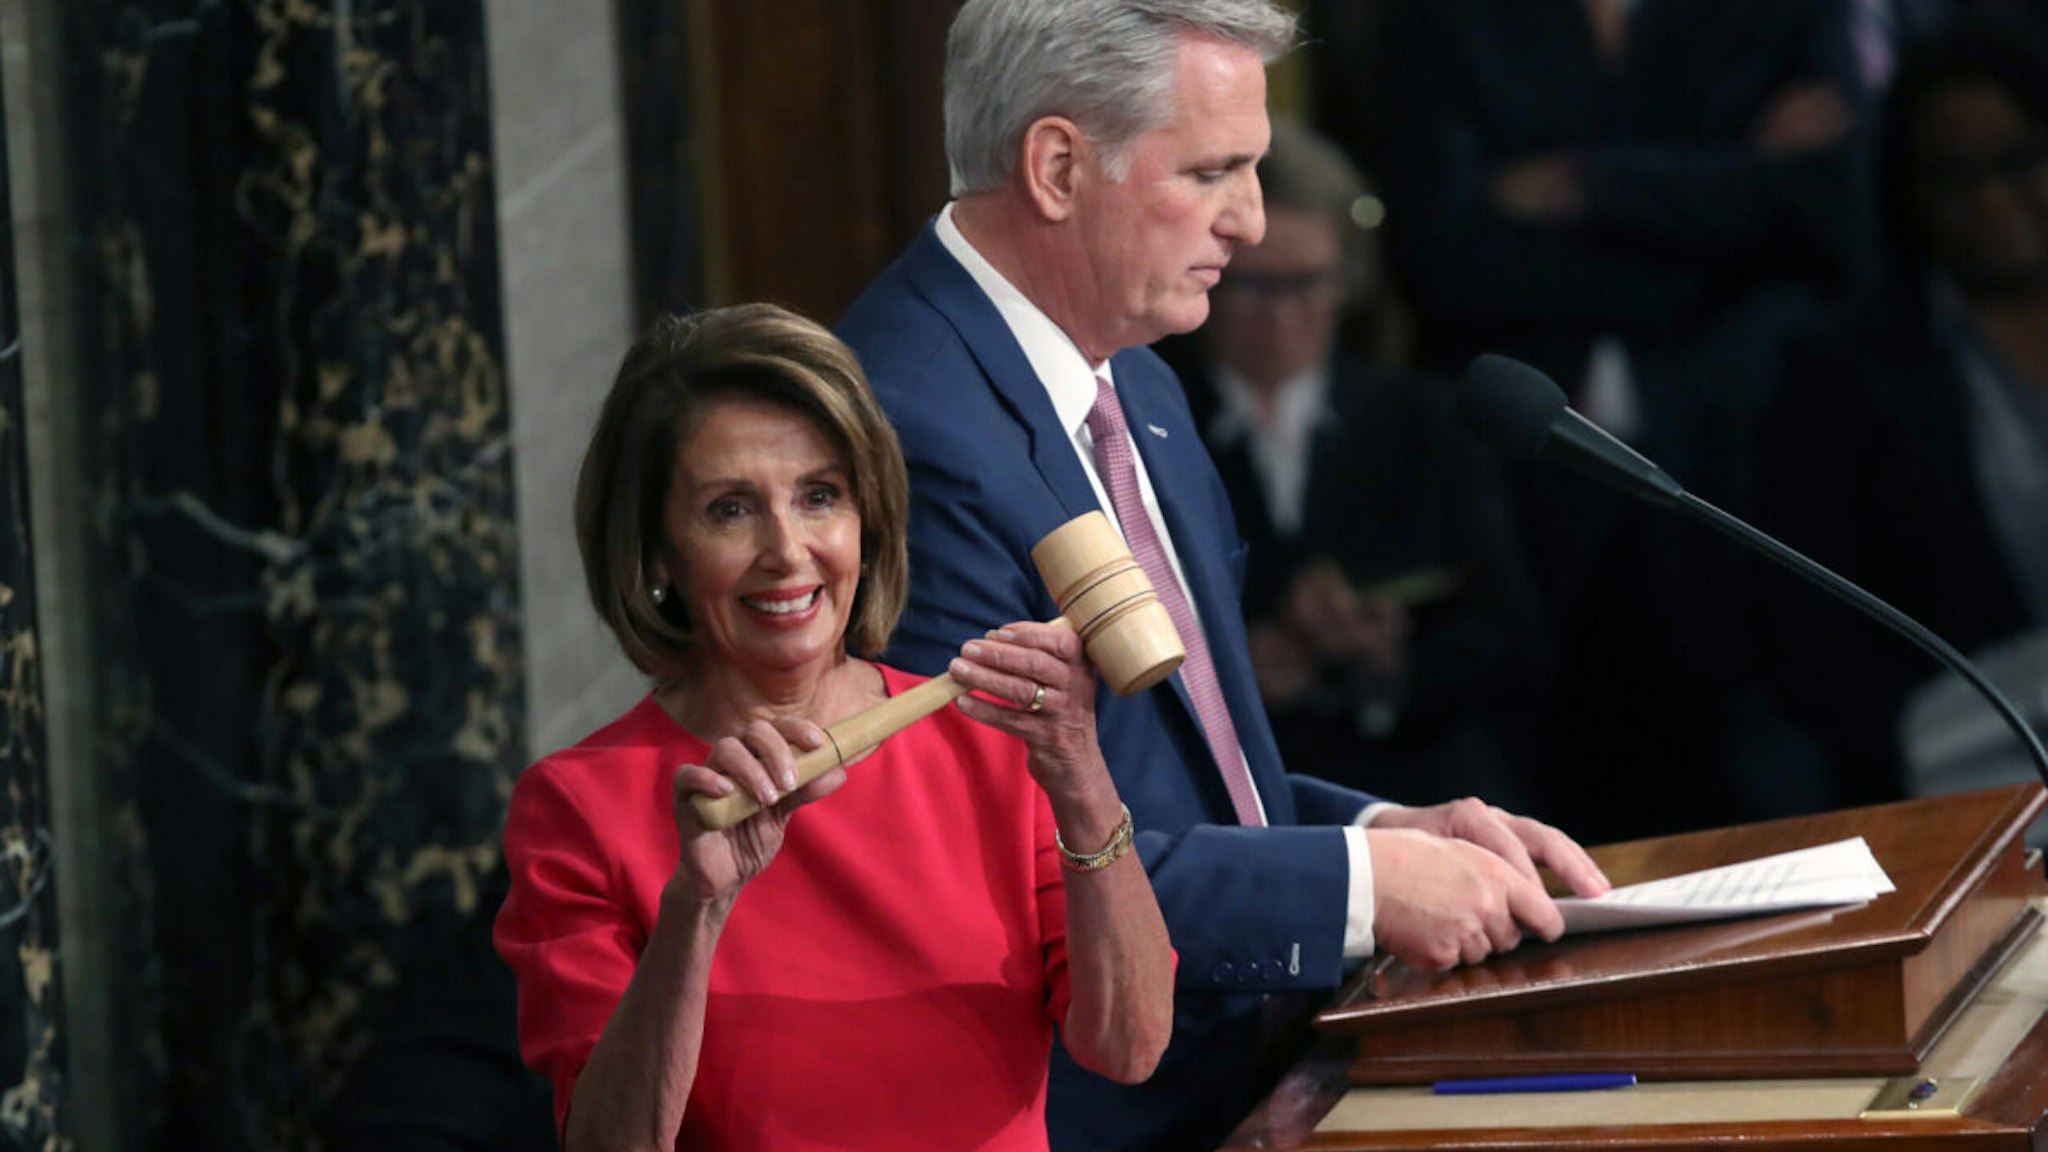 Speaker of the House Nancy Pelosi (D-CA) receives the gavel from Rep. Kevin McCarthy (R-CA) during the first session of the 116th Congress at the U.S. Capitol January 03, 2019 in Washington, DC. Under the cloud of a partial federal government shutdown, Pelosi reclaimed her former title as speaker and her fellow Democrats took control of the House of Representatives for the second time in eight years.